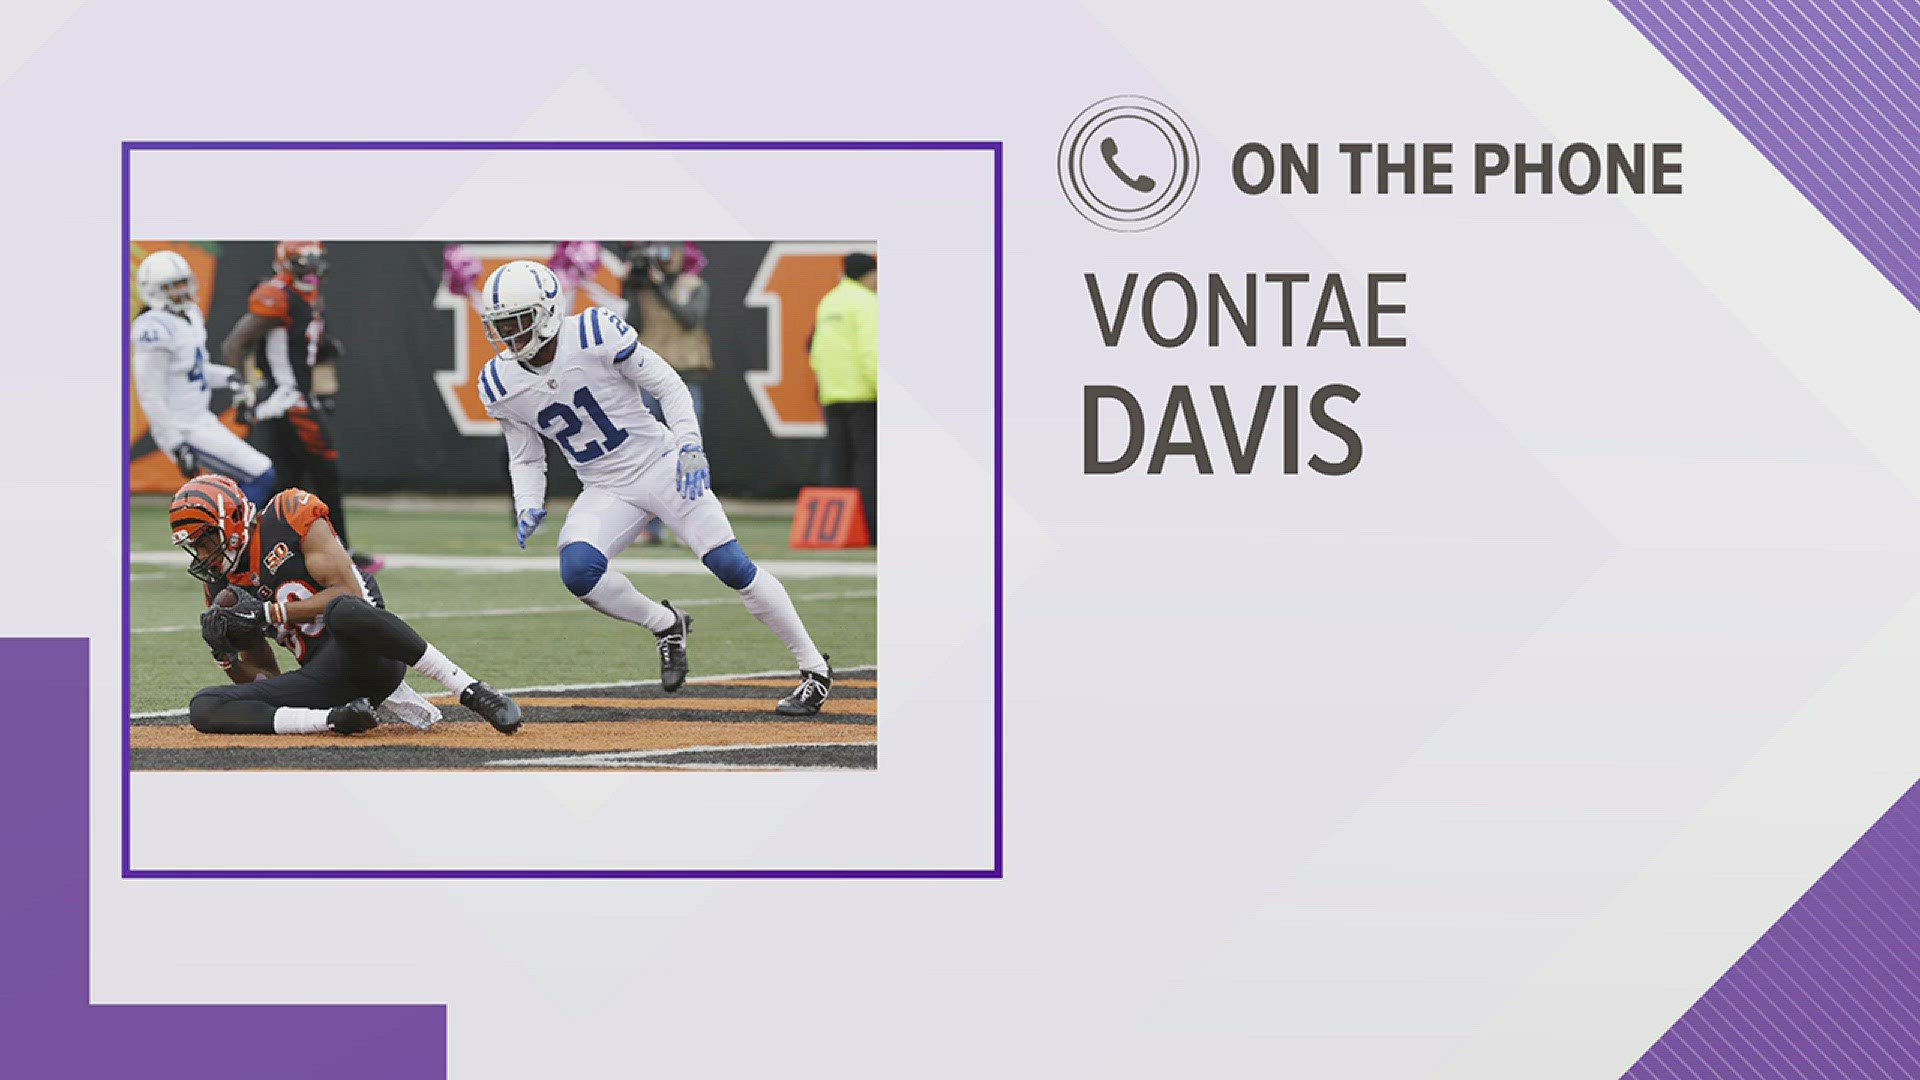 Vontae Davis says he's excited to be part of the Bills young and talented secondary.